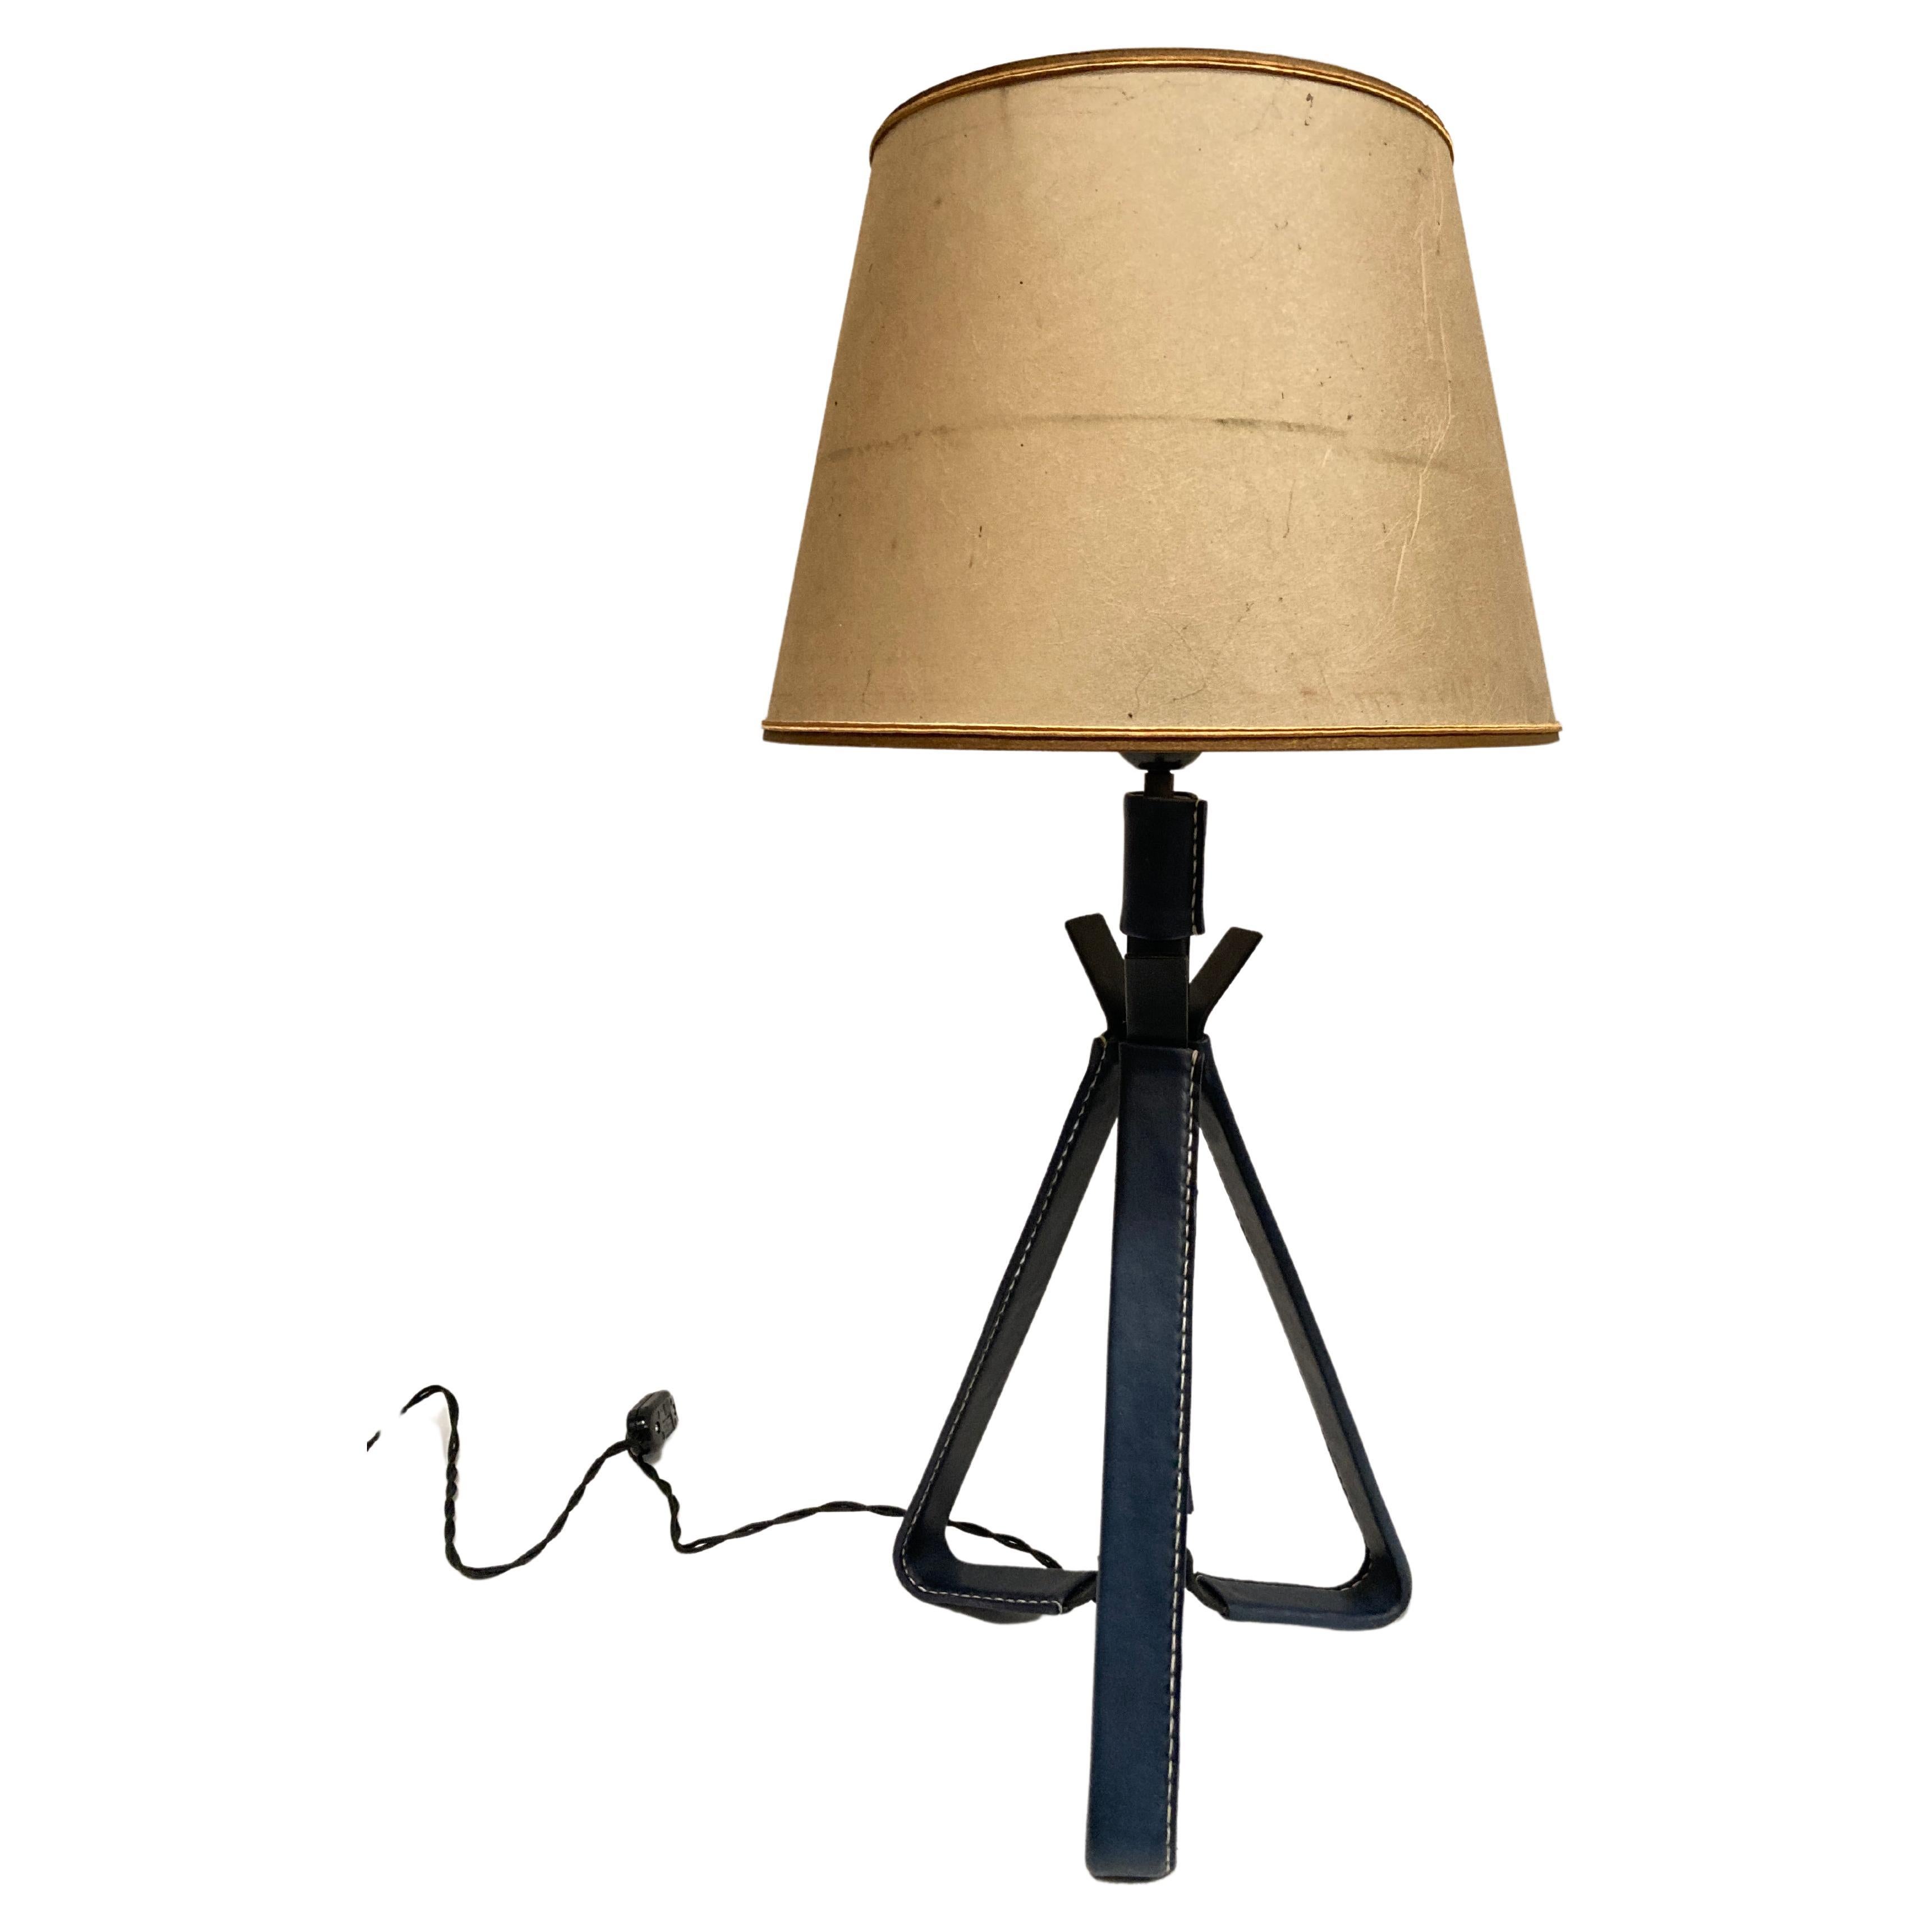 1950's Stitched leather table lamp by Jacques Adnet For Sale